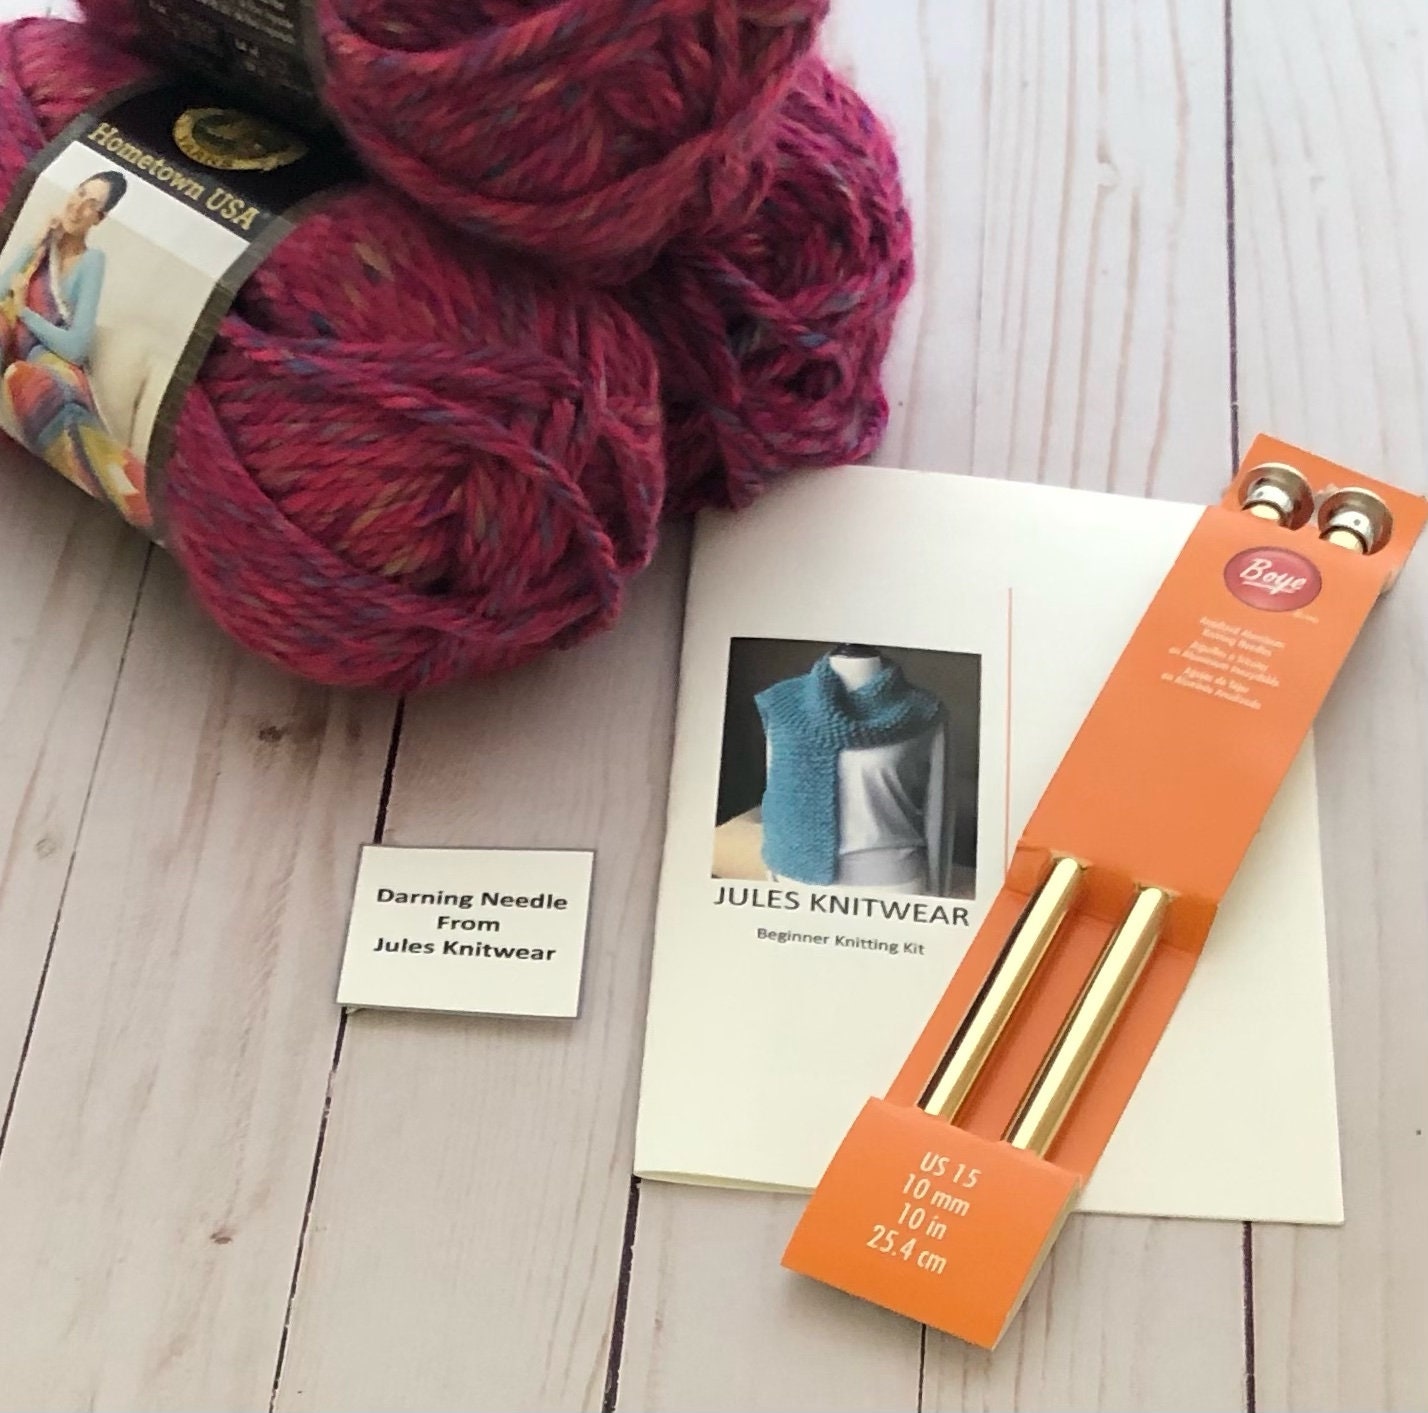 Learn to Knit, School Knitting Kit, Children Discover Knitting, Knitting  Kit, DIY Scarf for Children, Knitting Tutorial, Incl. Instructions 